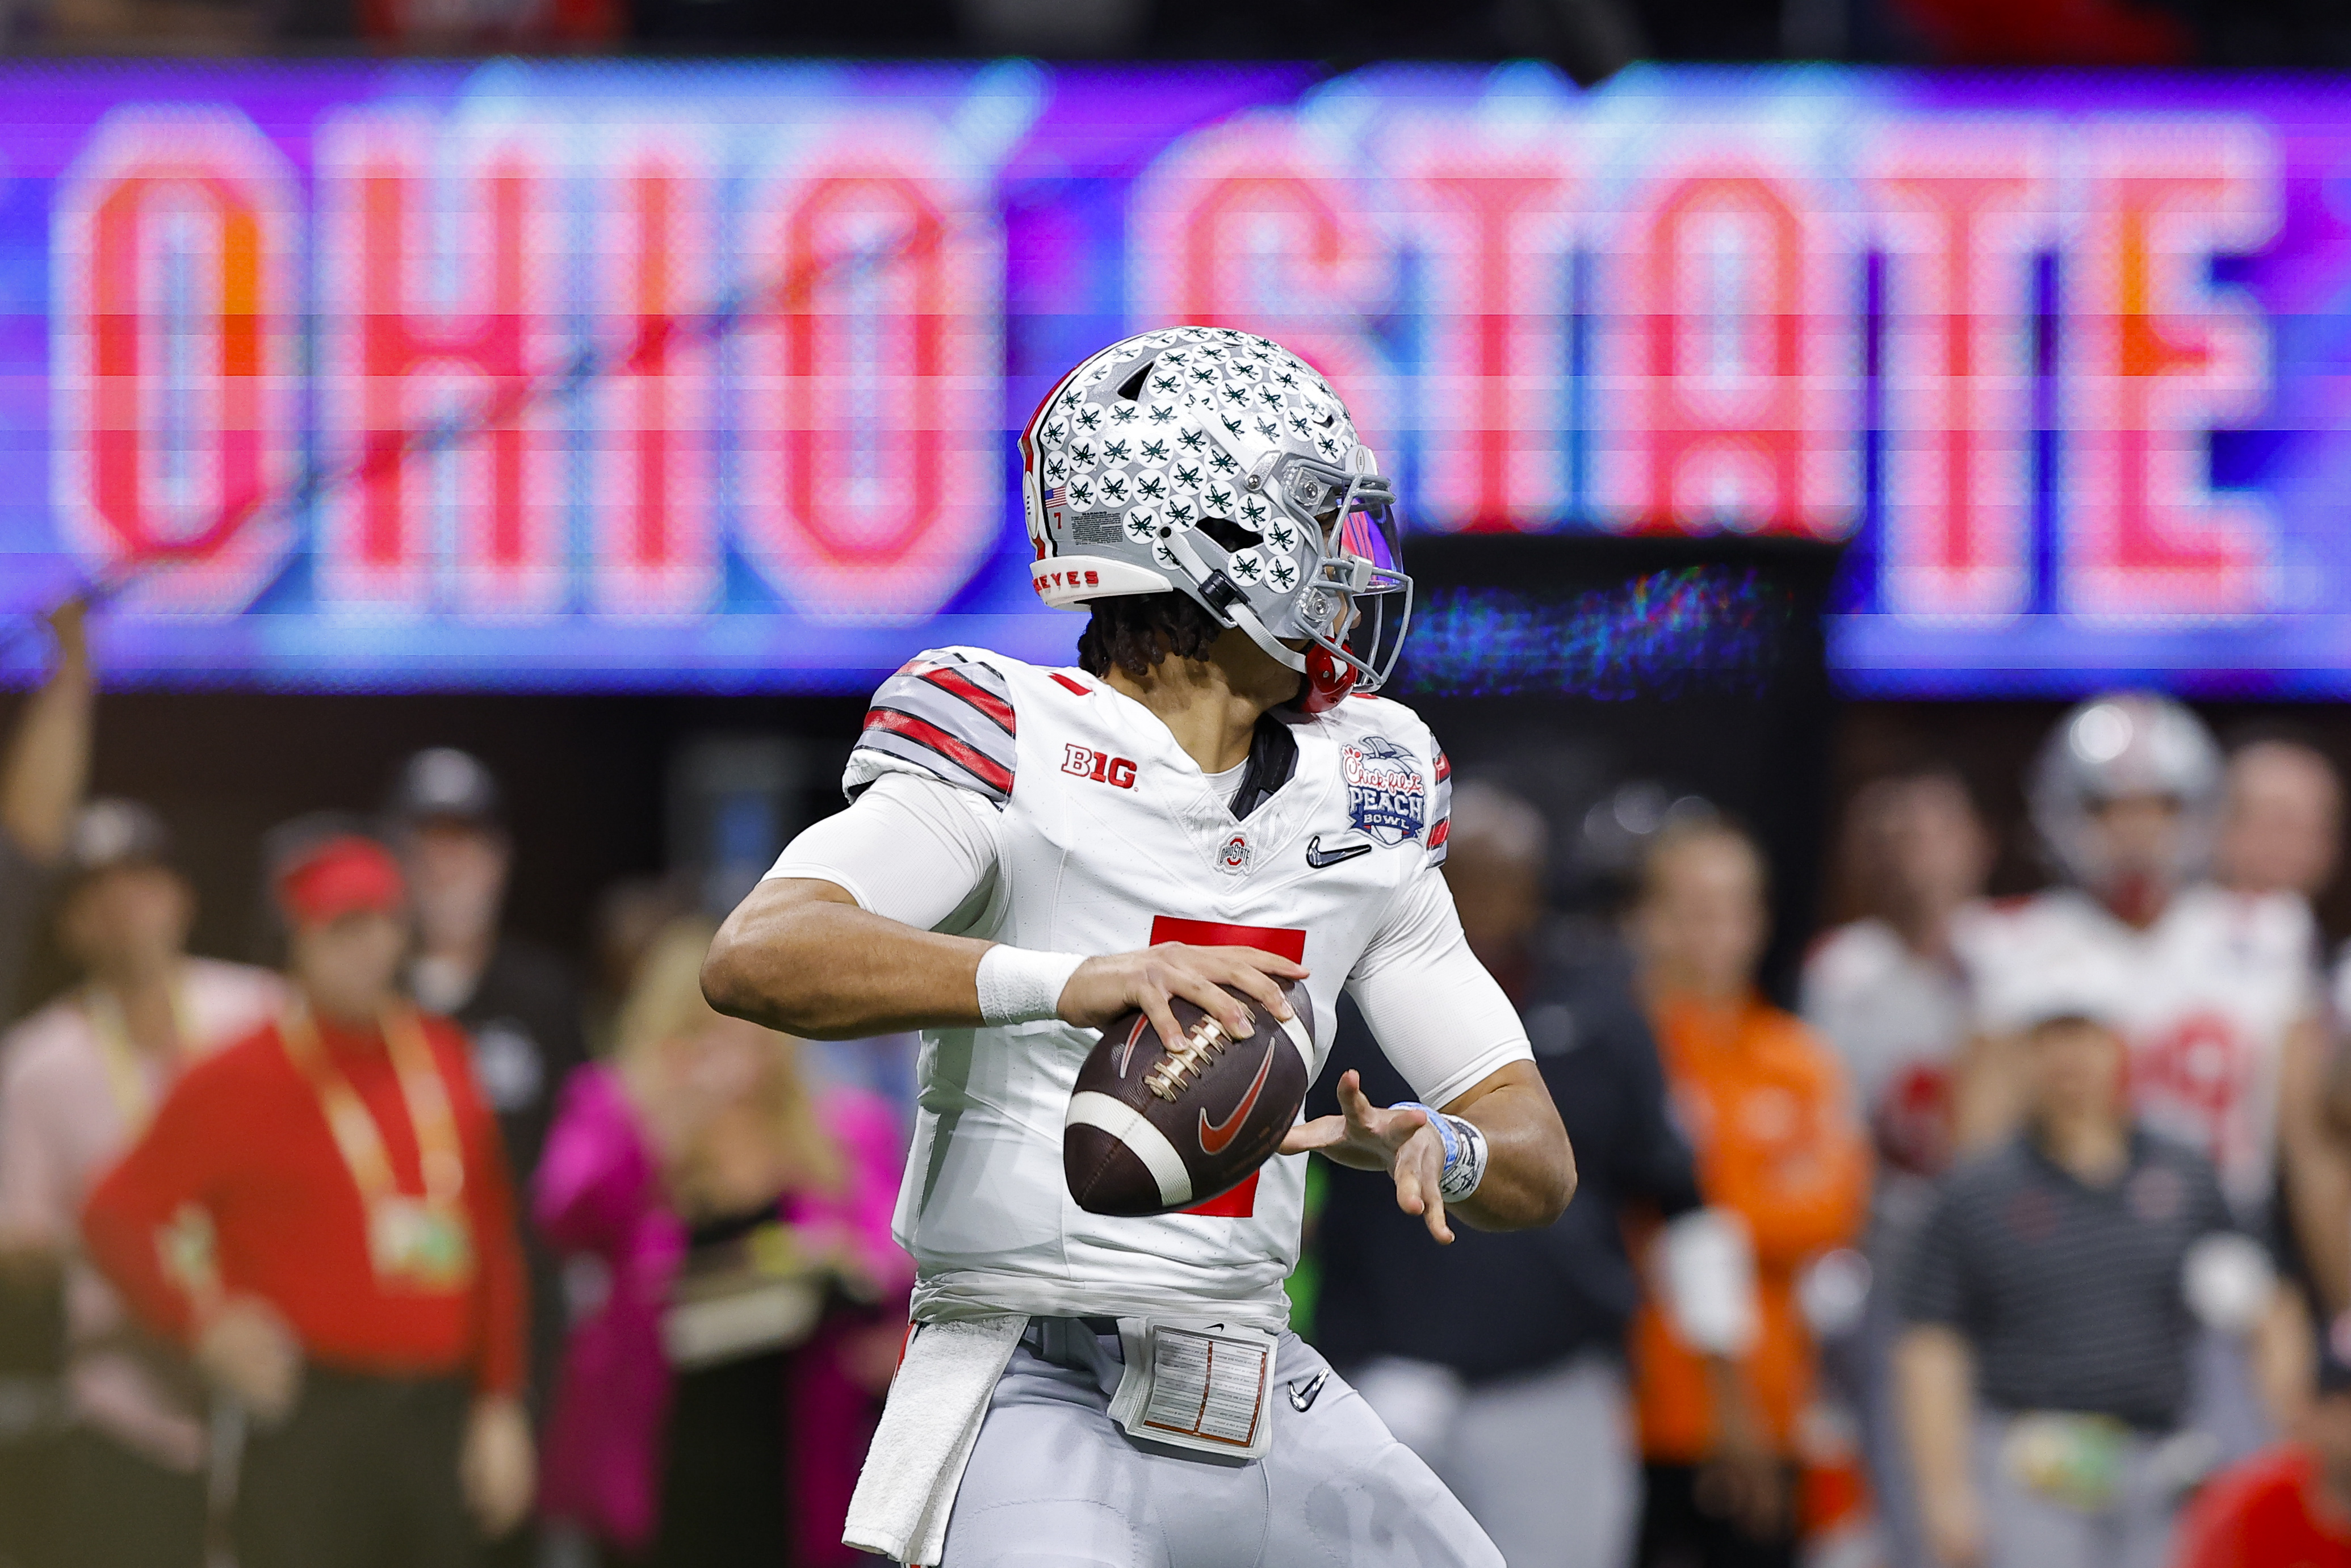 With three first round NFL draft picks, Ohio State football makes